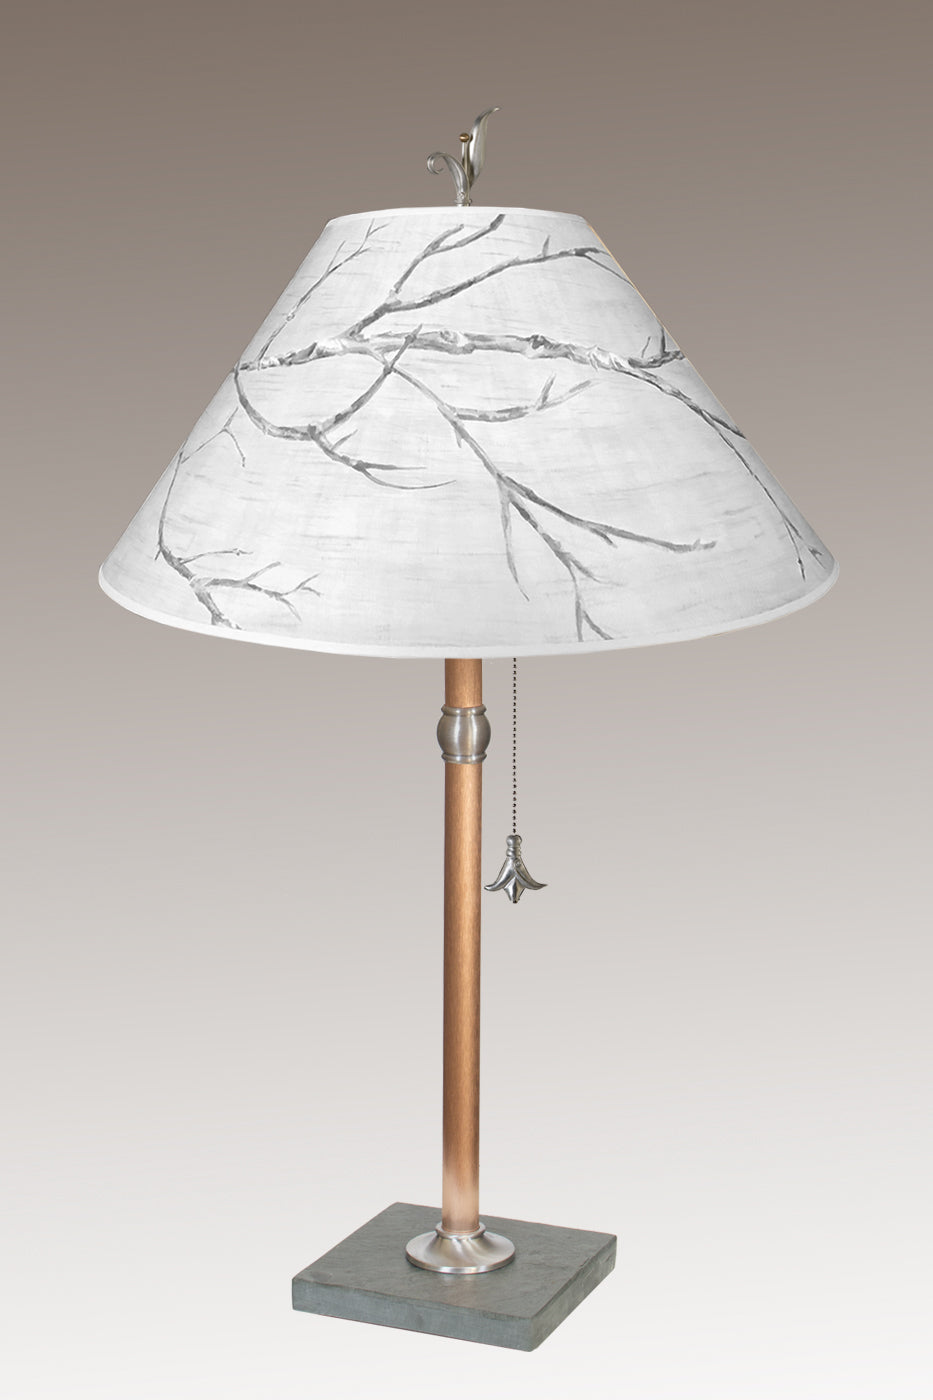 Janna Ugone & Co Table Lamps Copper Table Lamp with Large Conical Shade in Sweeping Branch